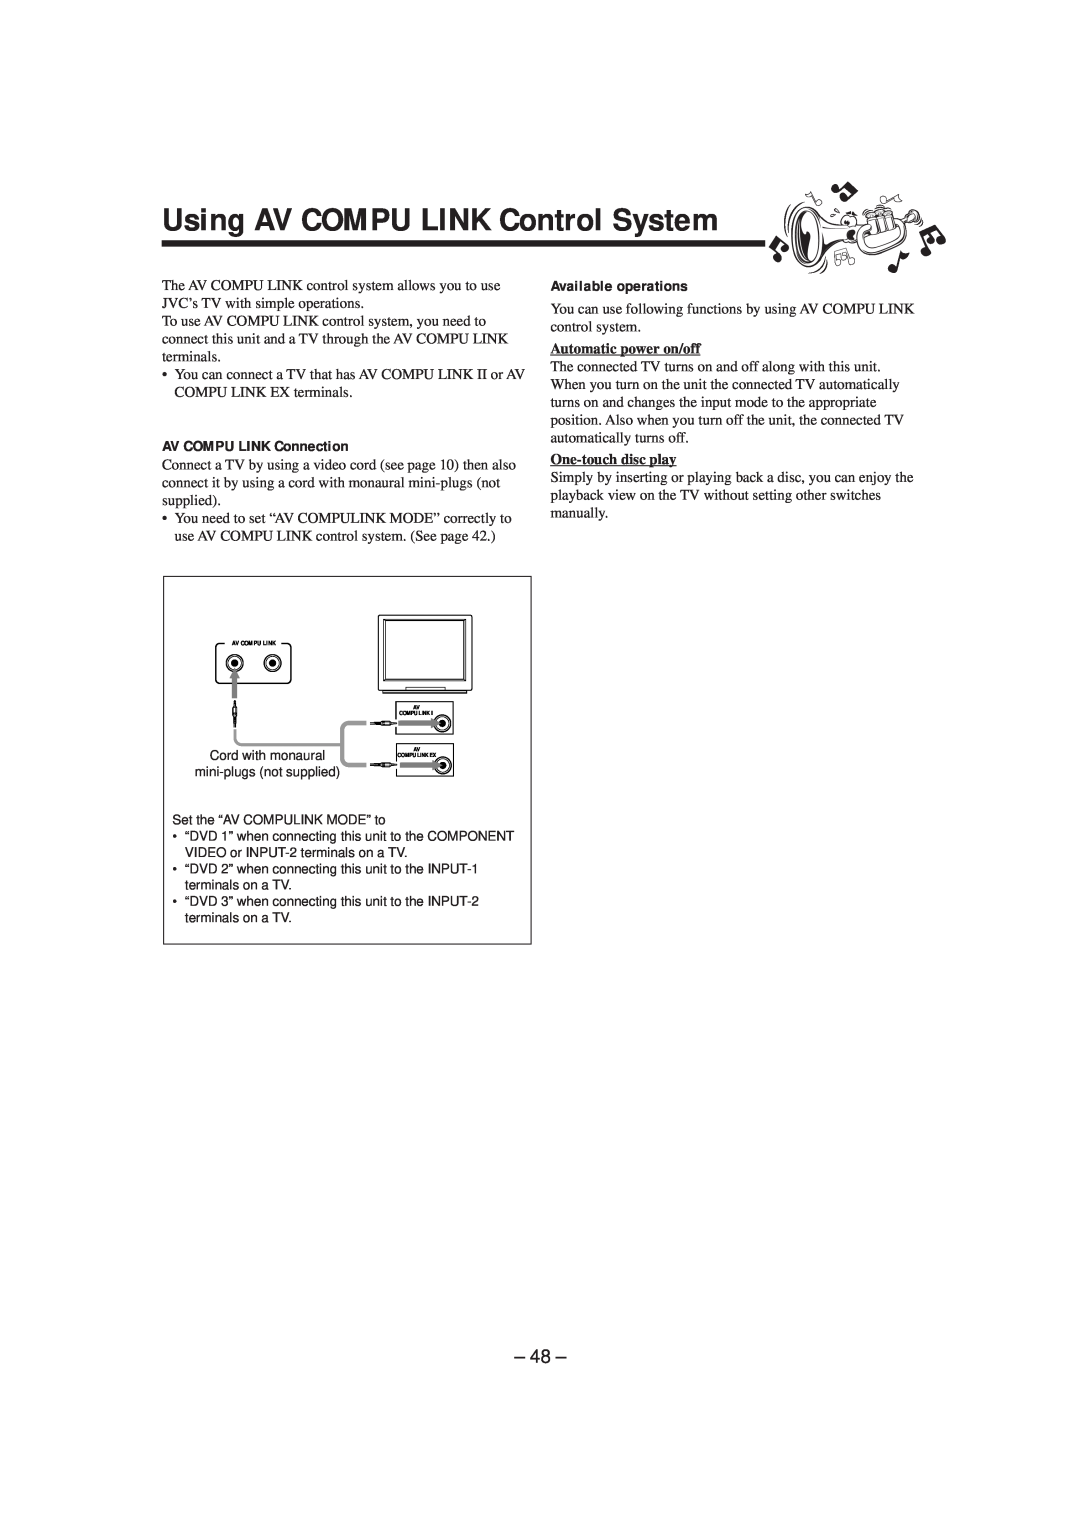 JVC GVT0057-016A Using AV COMPU LINK Control System, AV COMPU LINK Connection, Available operations, One-touchdisc play 